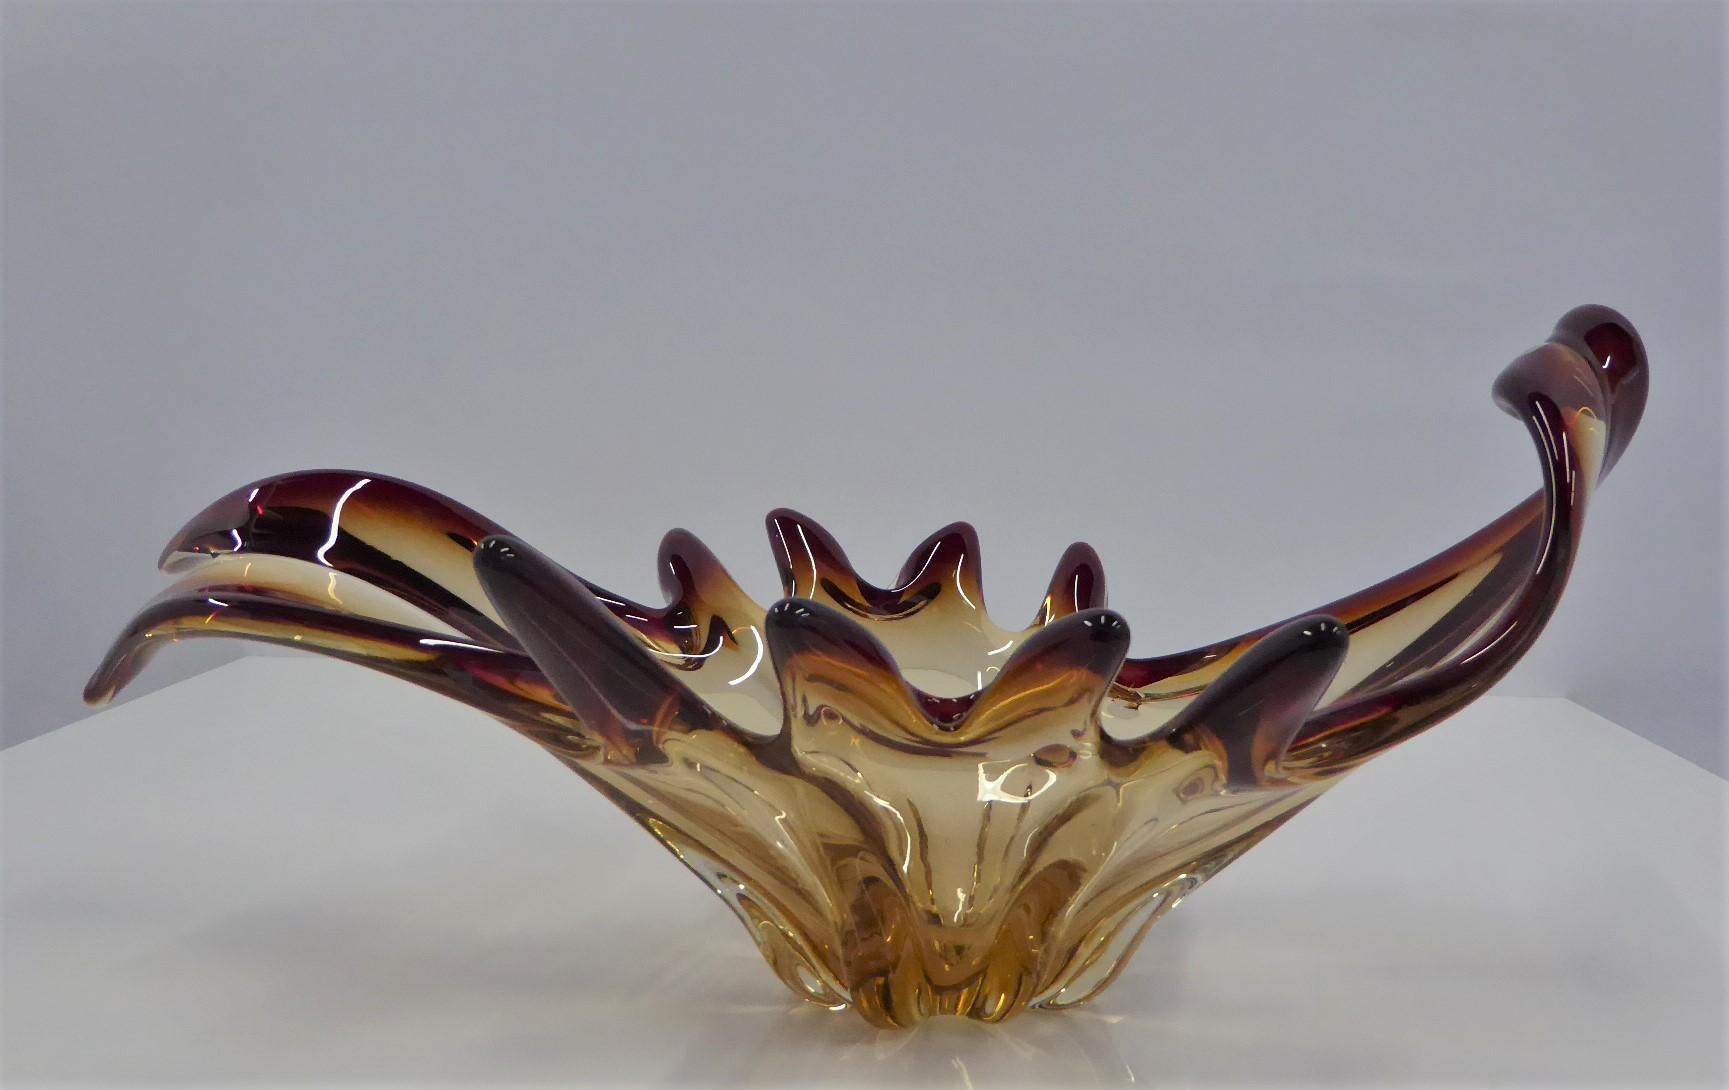 Large Modern Freeform Blown Murano Glass Vessel, Italy, 1960s For Sale 1